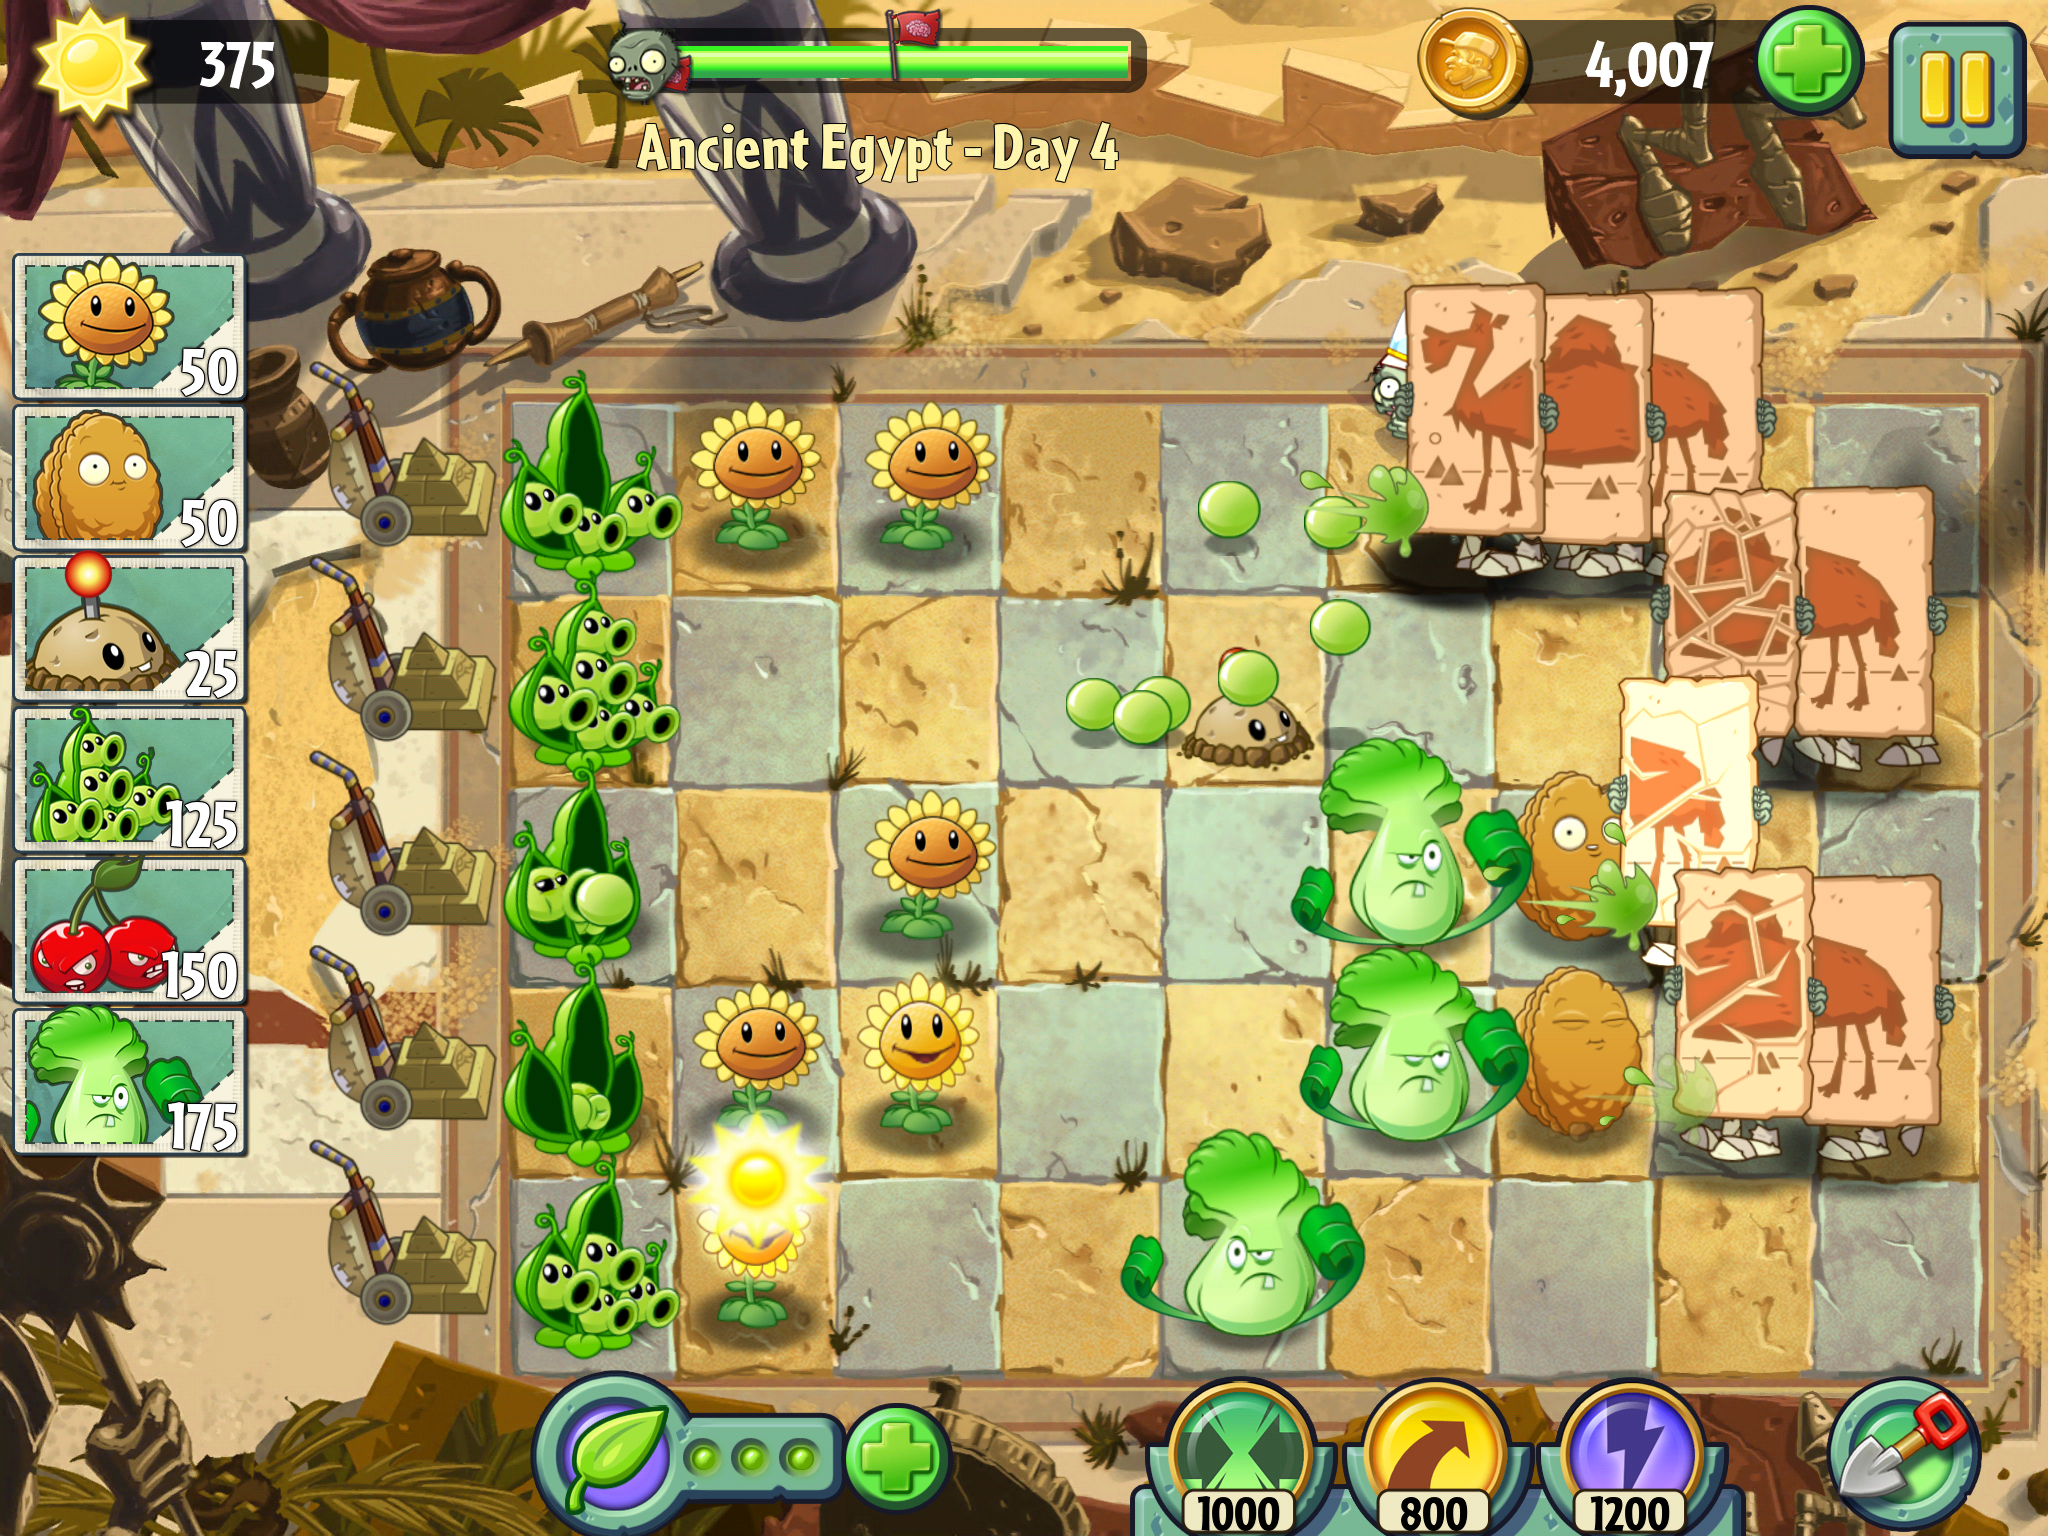 Gameplay video of Plants vs. Zombies 2